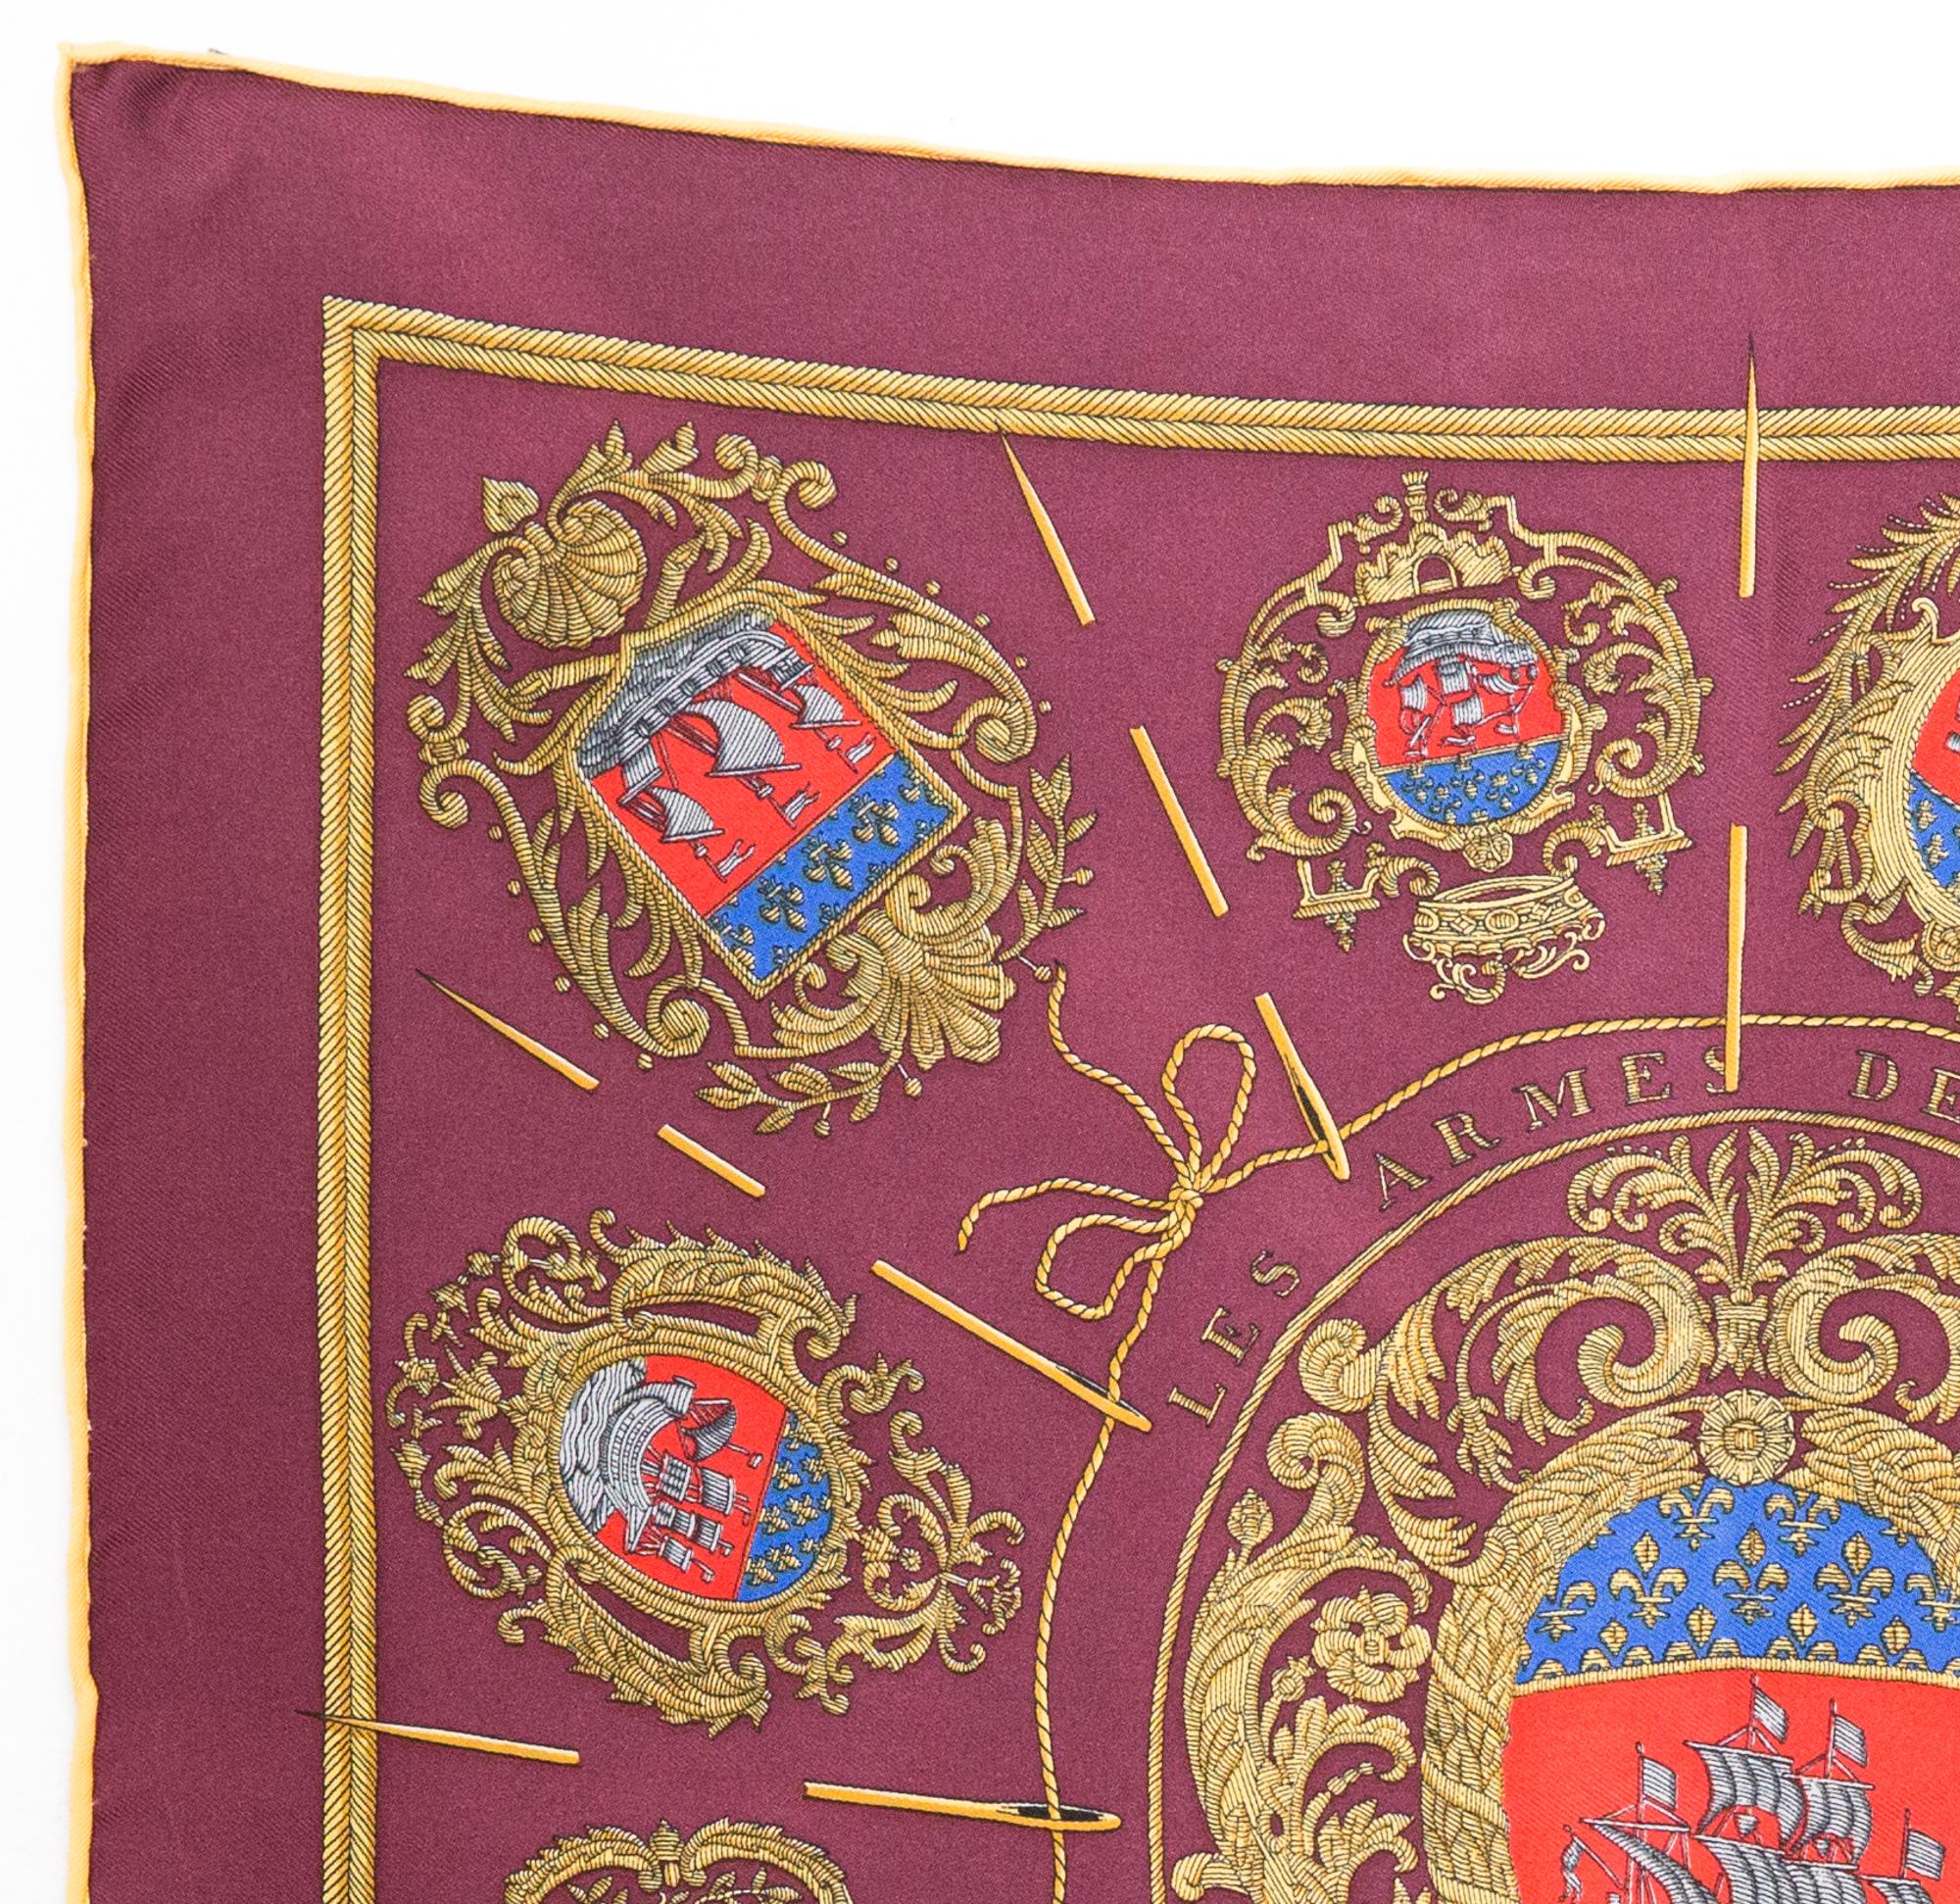 1992 Hermès Les Armes De Paris designed by Hugo Grygkar gavroche silk scarf featuring a bordeaux ground, a printed regal scene and a Hermes signature.
First edition 1954
16.9in (43cm) X 16.9in (43cm)
In good vintage condition. Made in France.
We